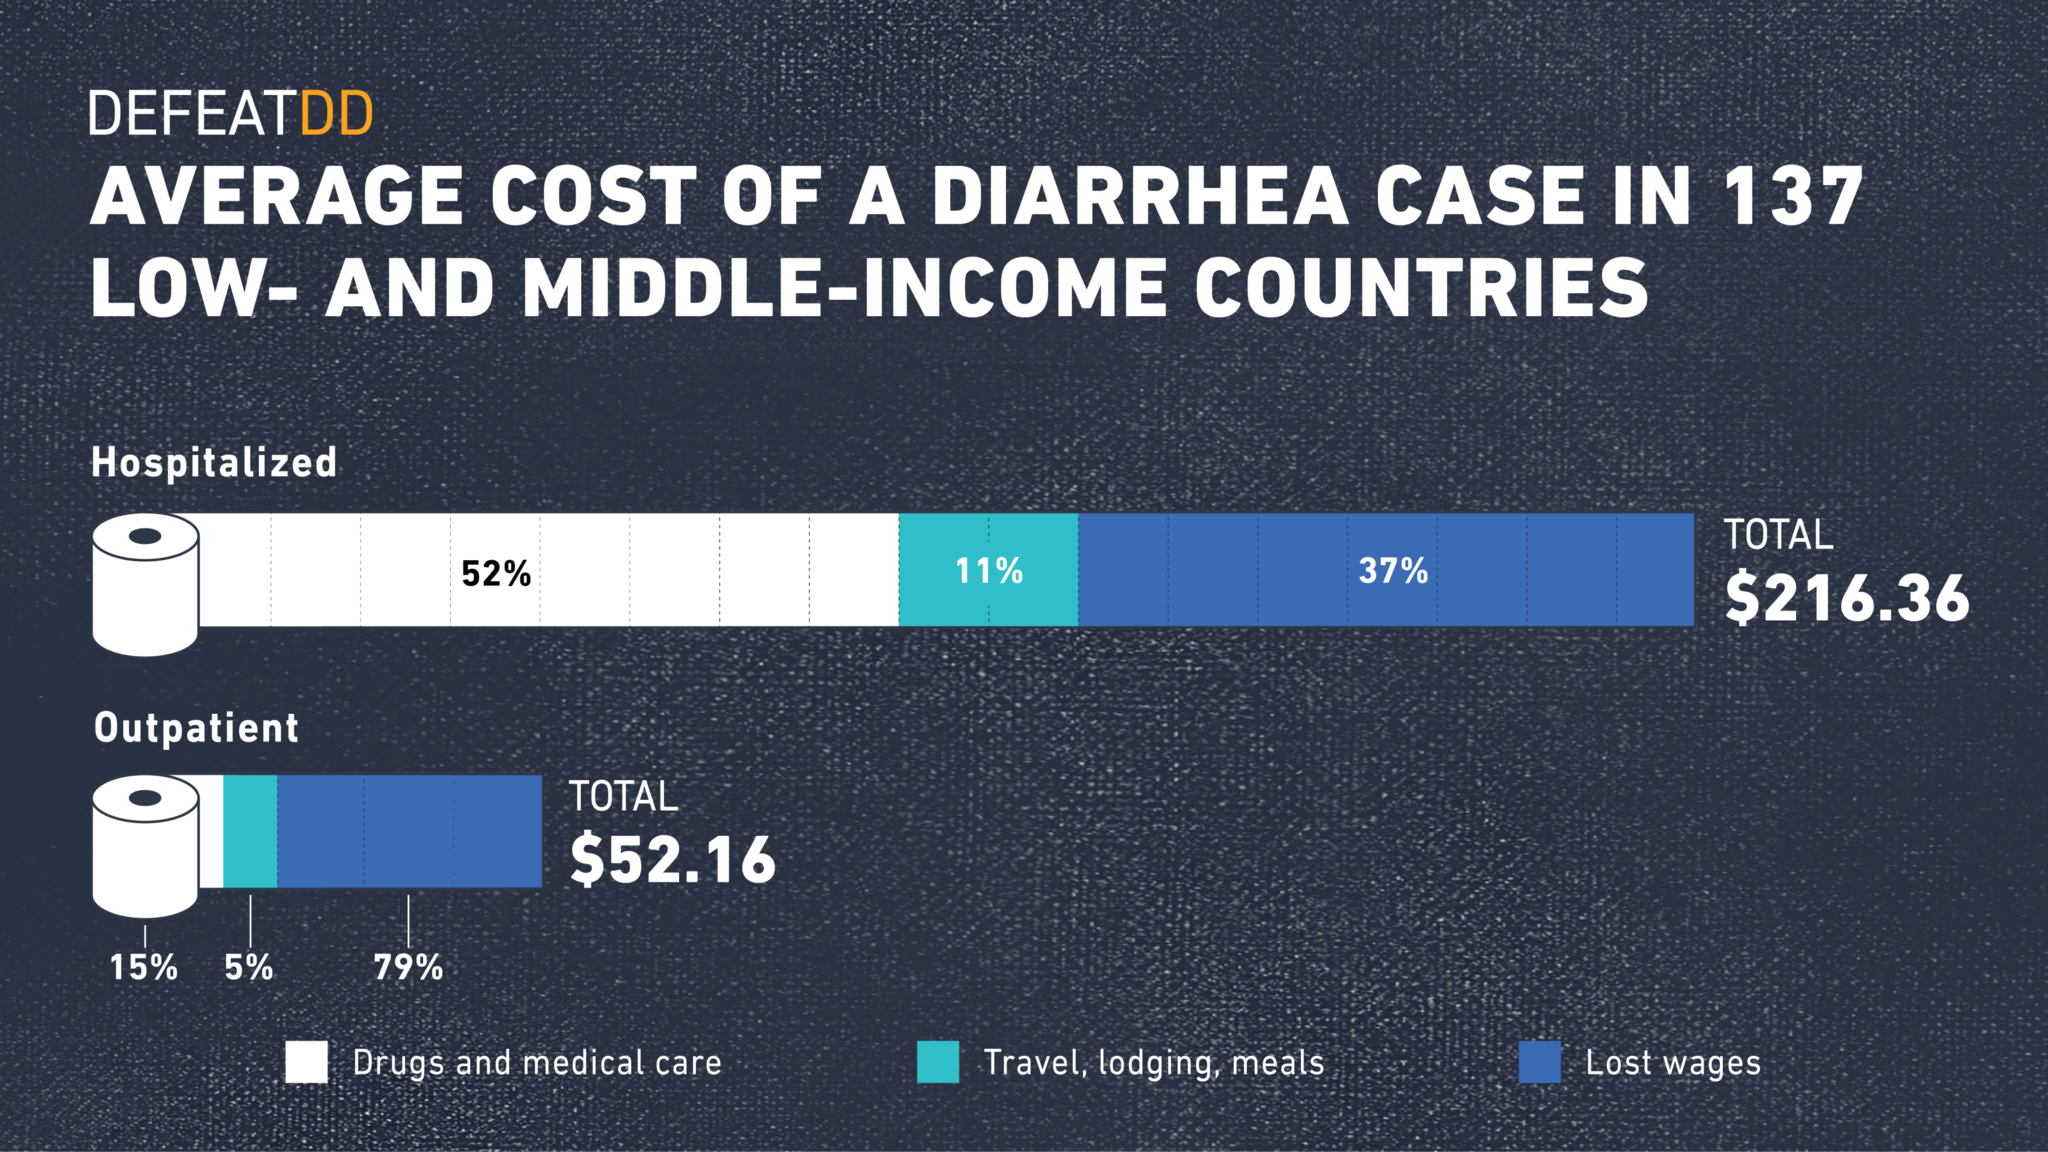 Bar chart showing average cost of inpatient and outpatient diarrhea cases